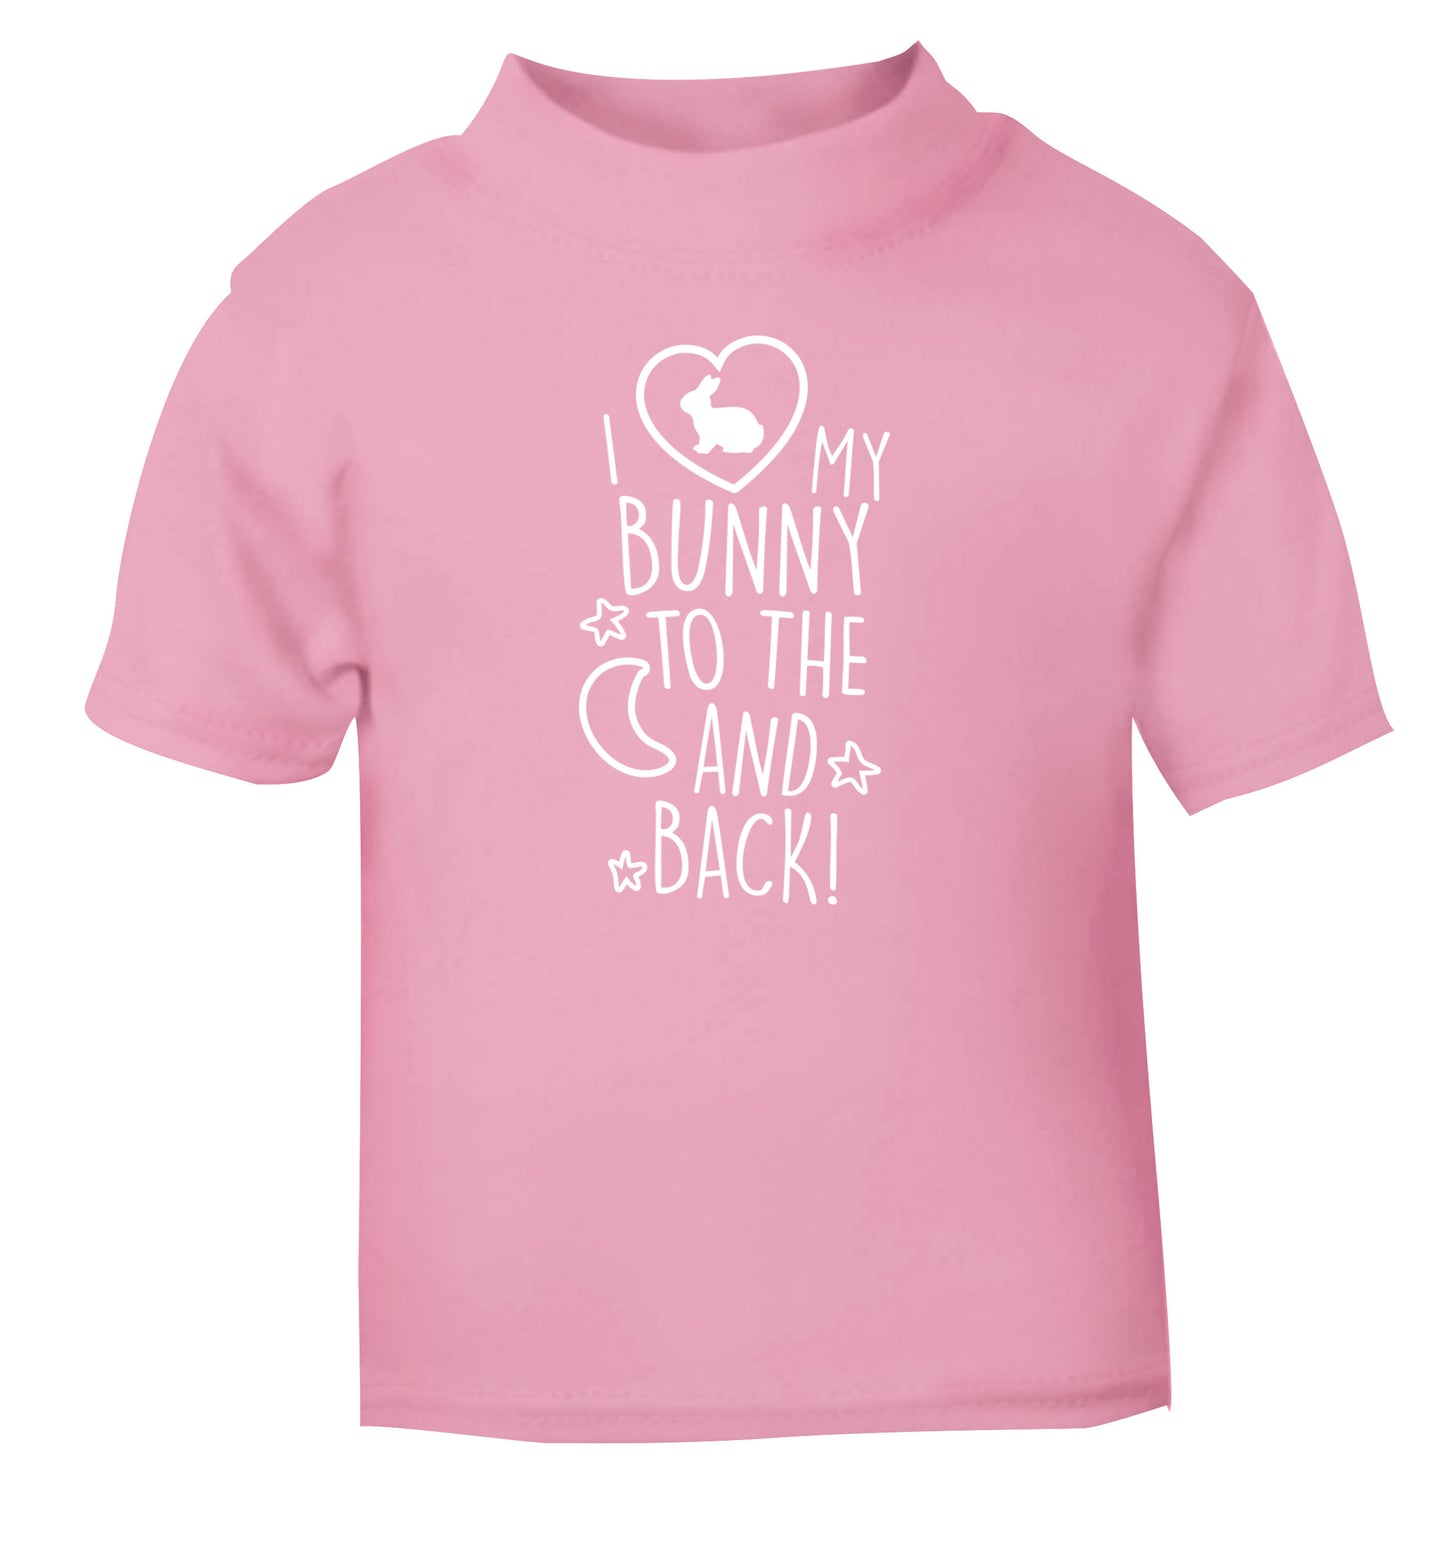 I love my bunny to the moon and back light pink Baby Toddler Tshirt 2 Years